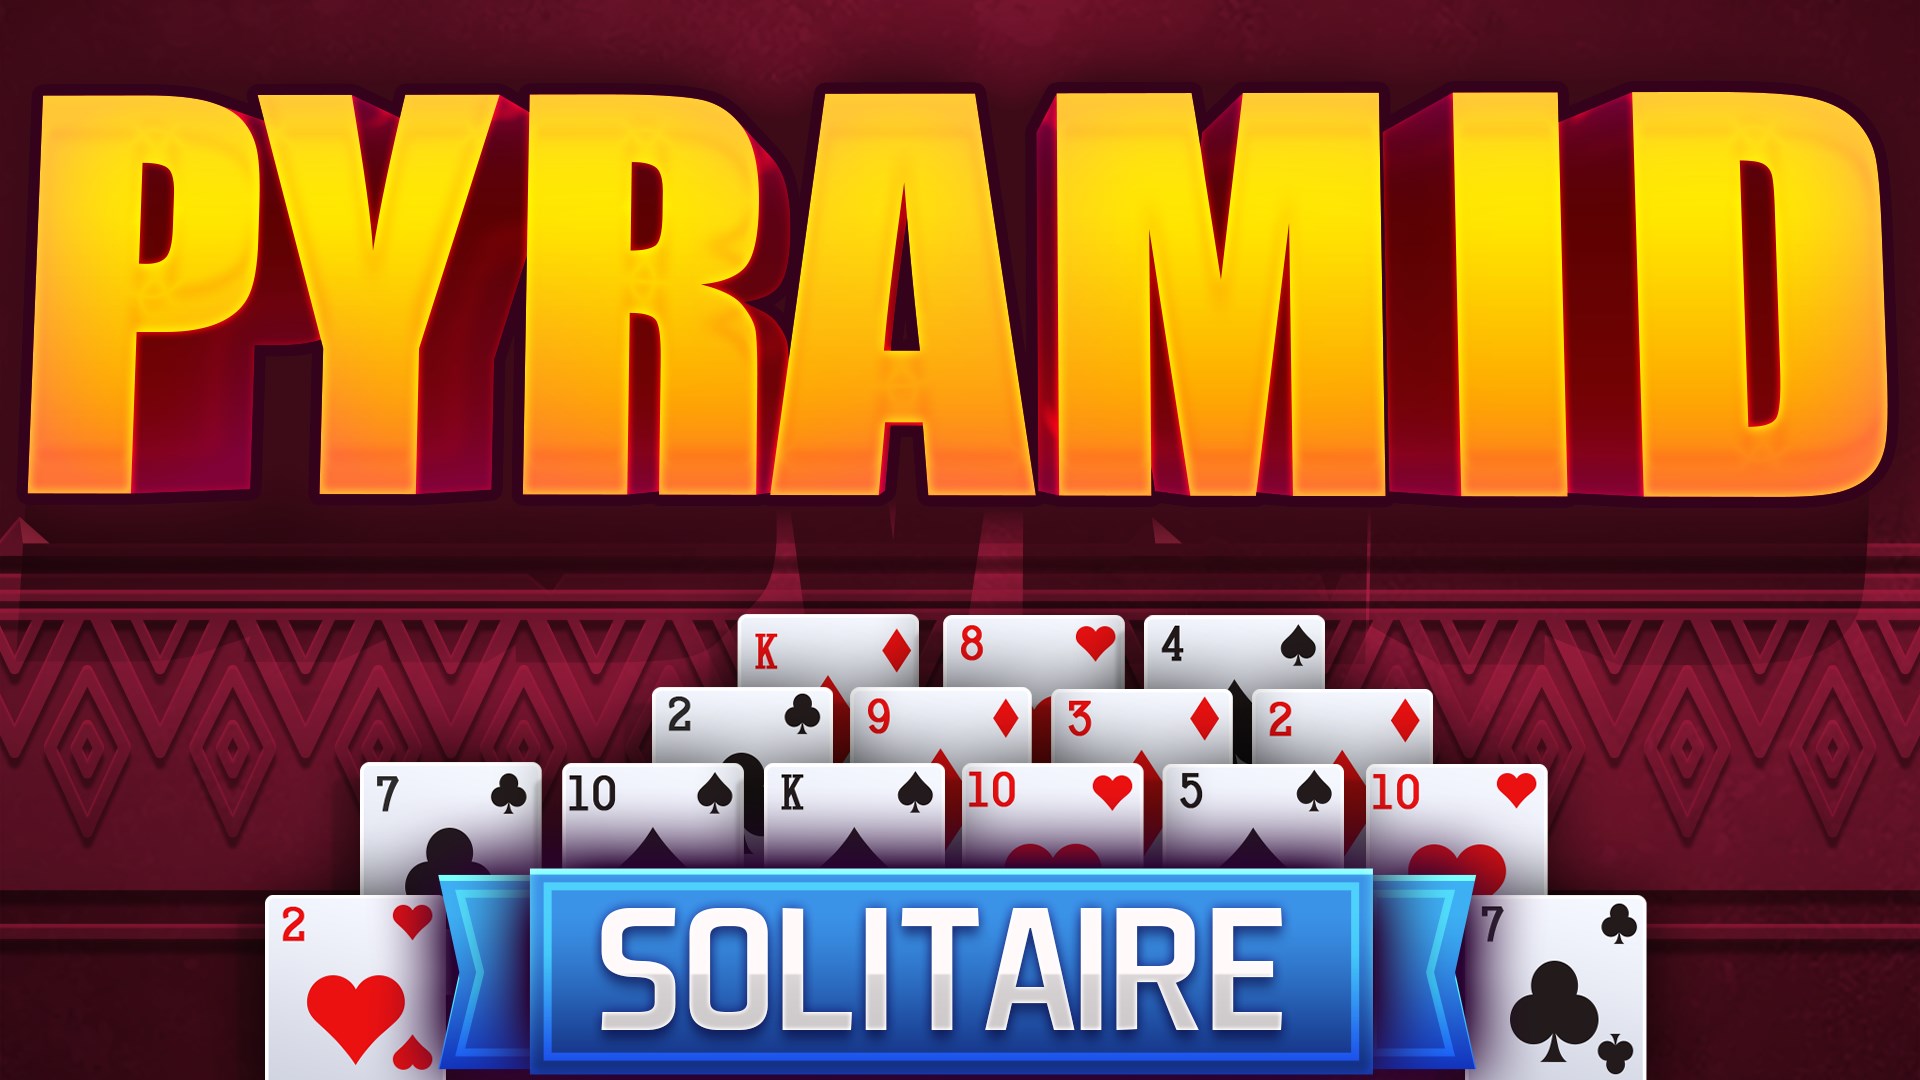 Get Pyramid Solitaire Real Fun Card Game Microsoft Store En Gb,Free Crochet Hat Patterns For Beginners